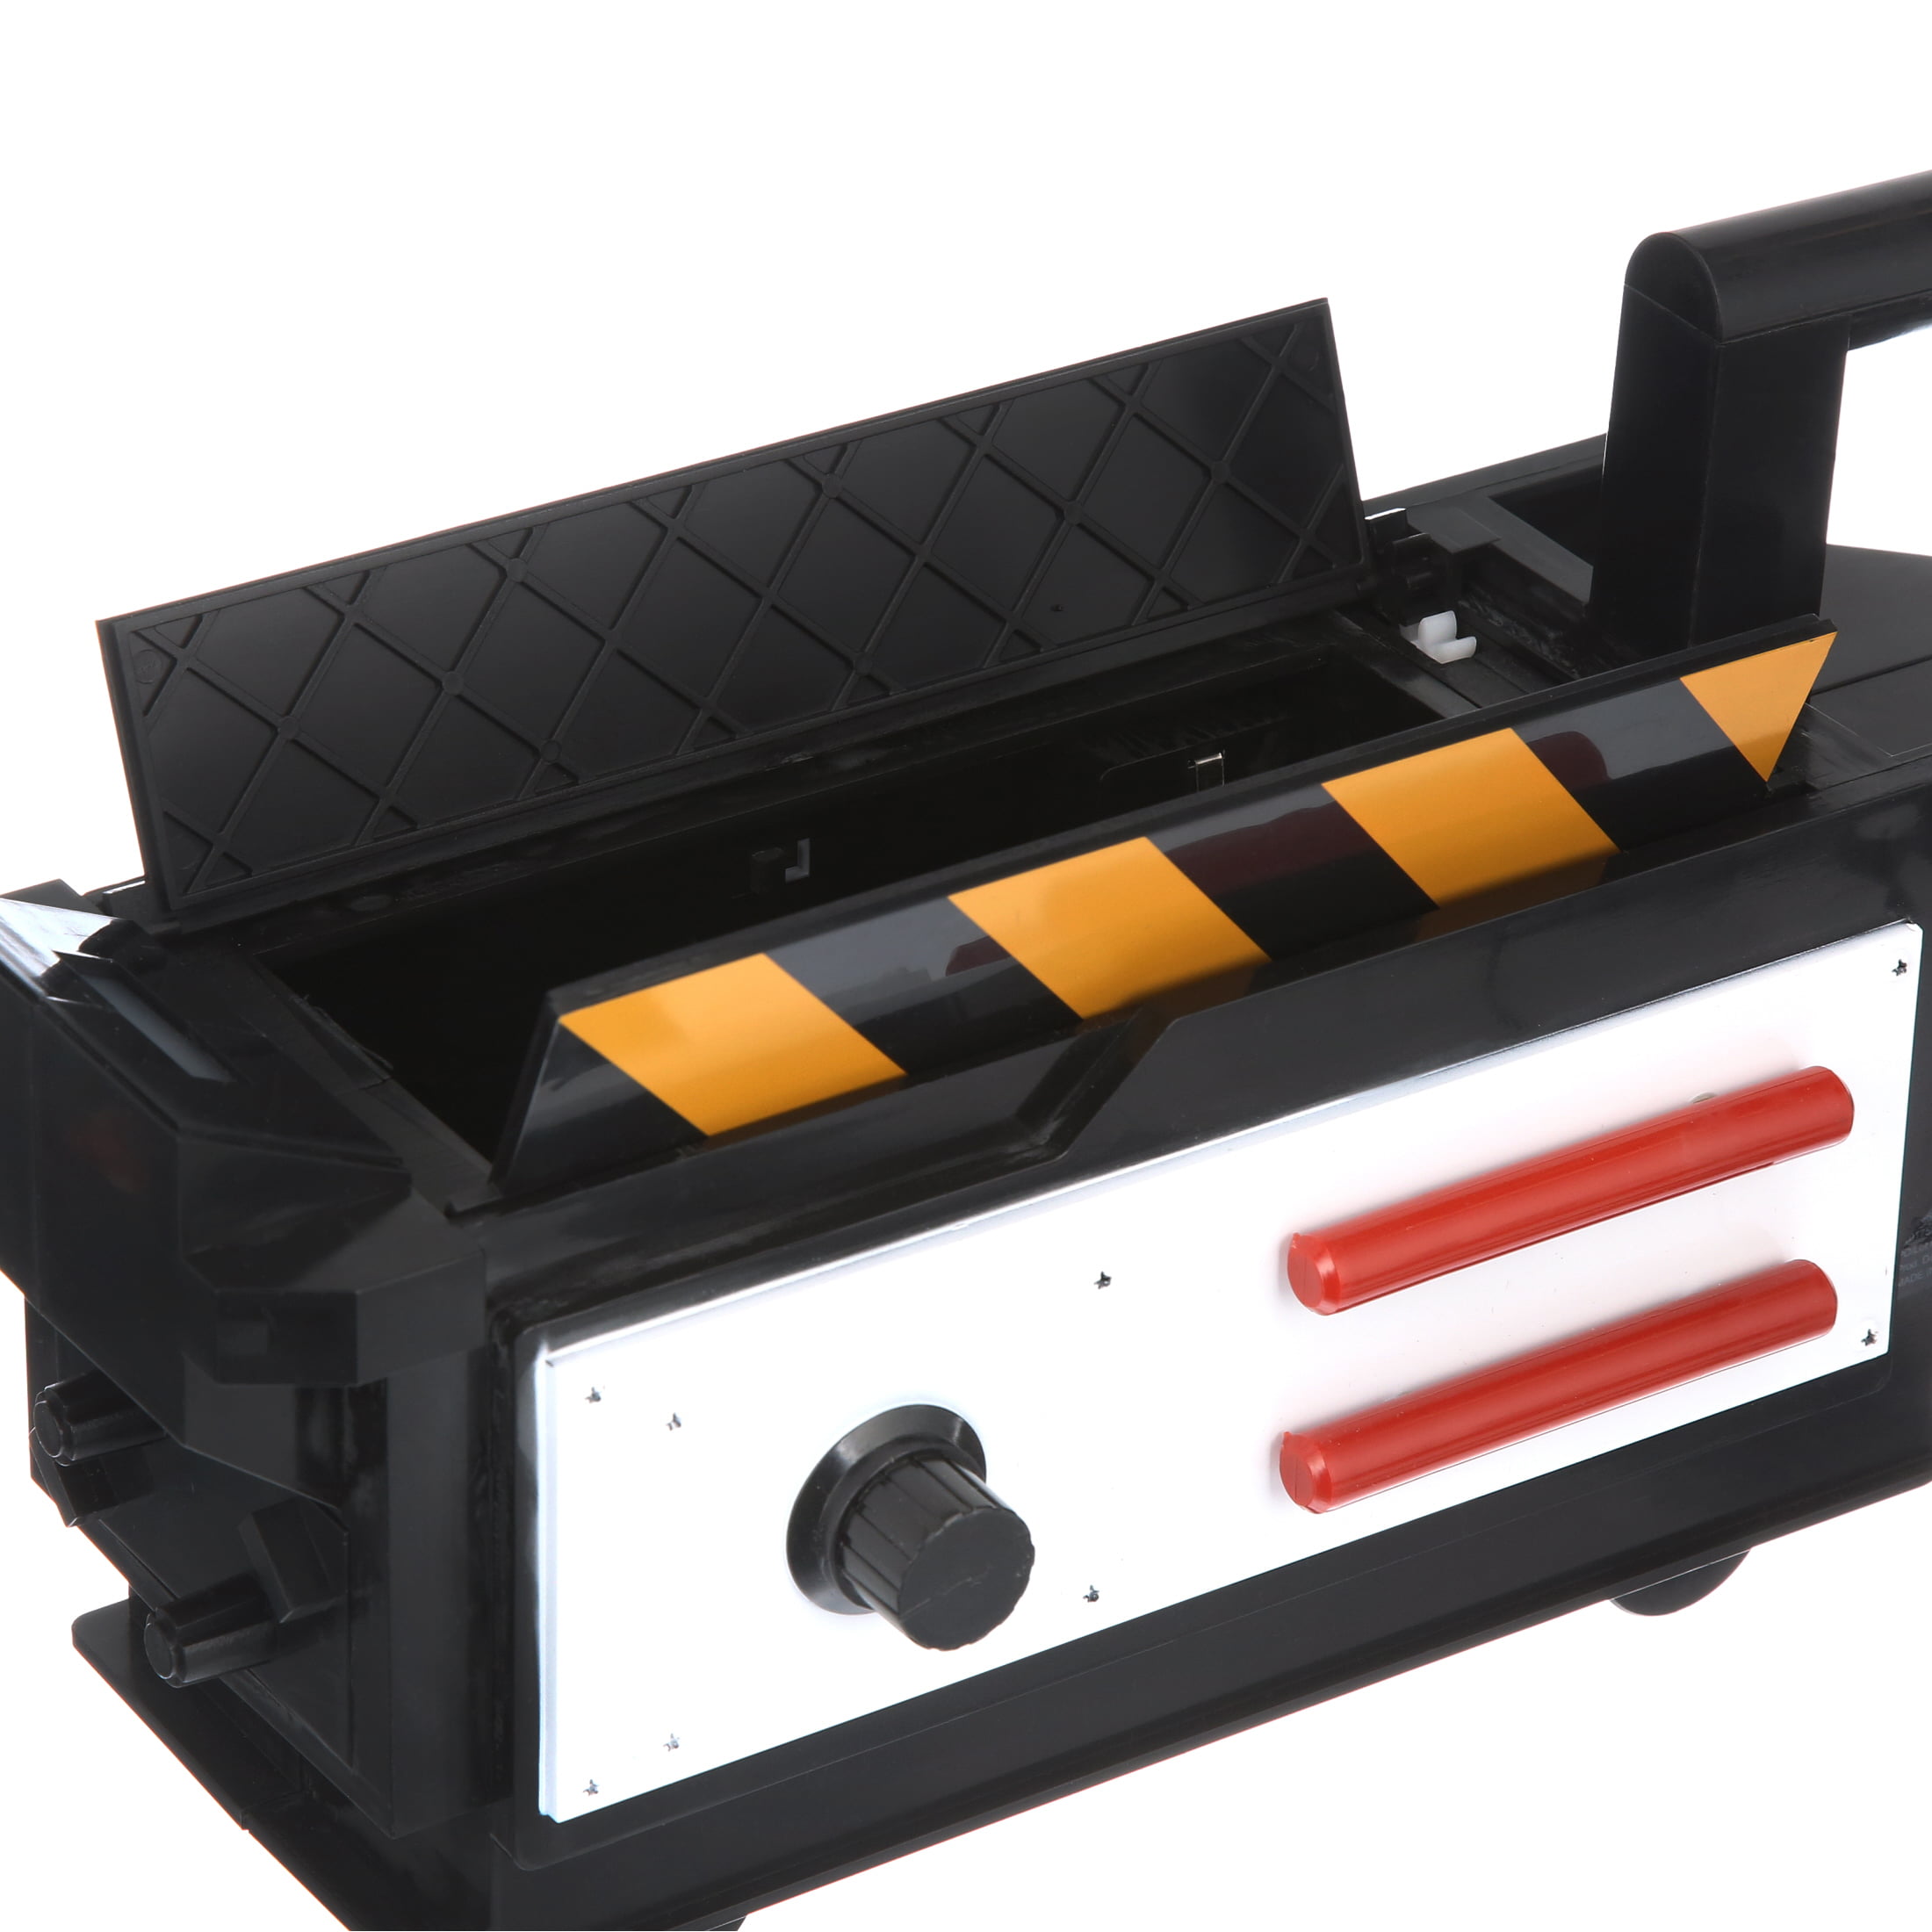 Imagine Ghostbusters Ghost Trap with Foot Pedal for sale online 